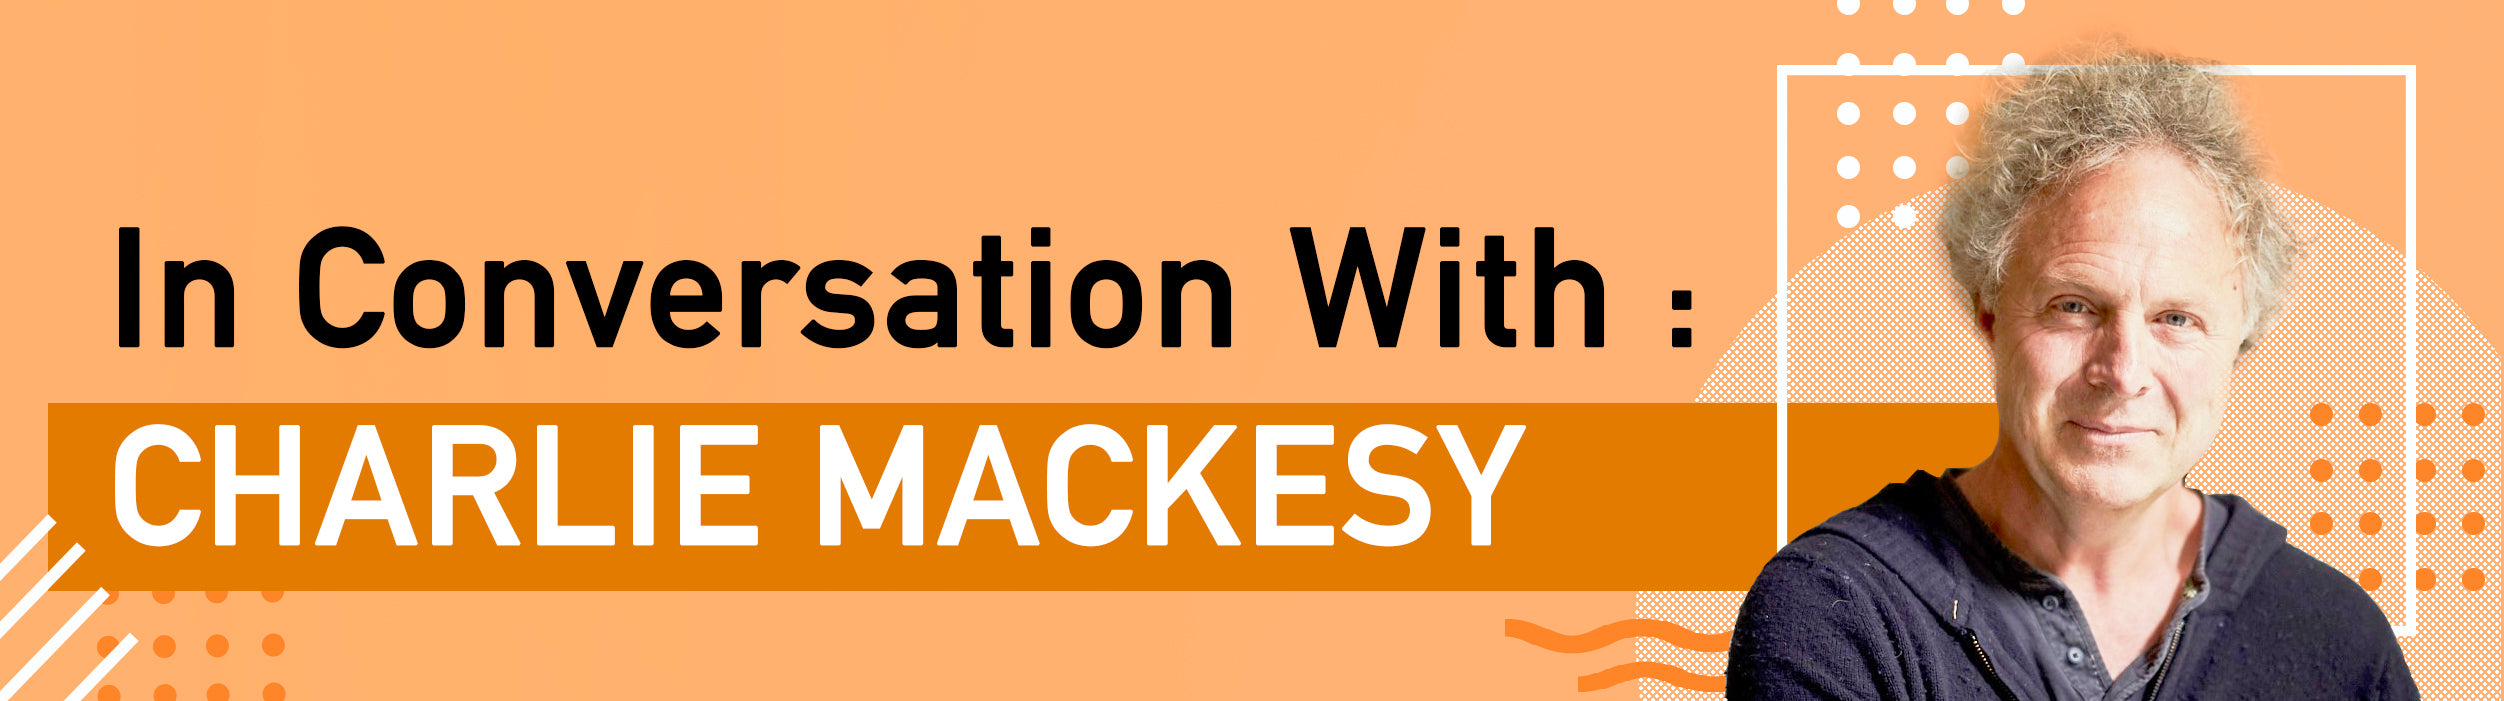 In Conversation with Charlie Mackesy